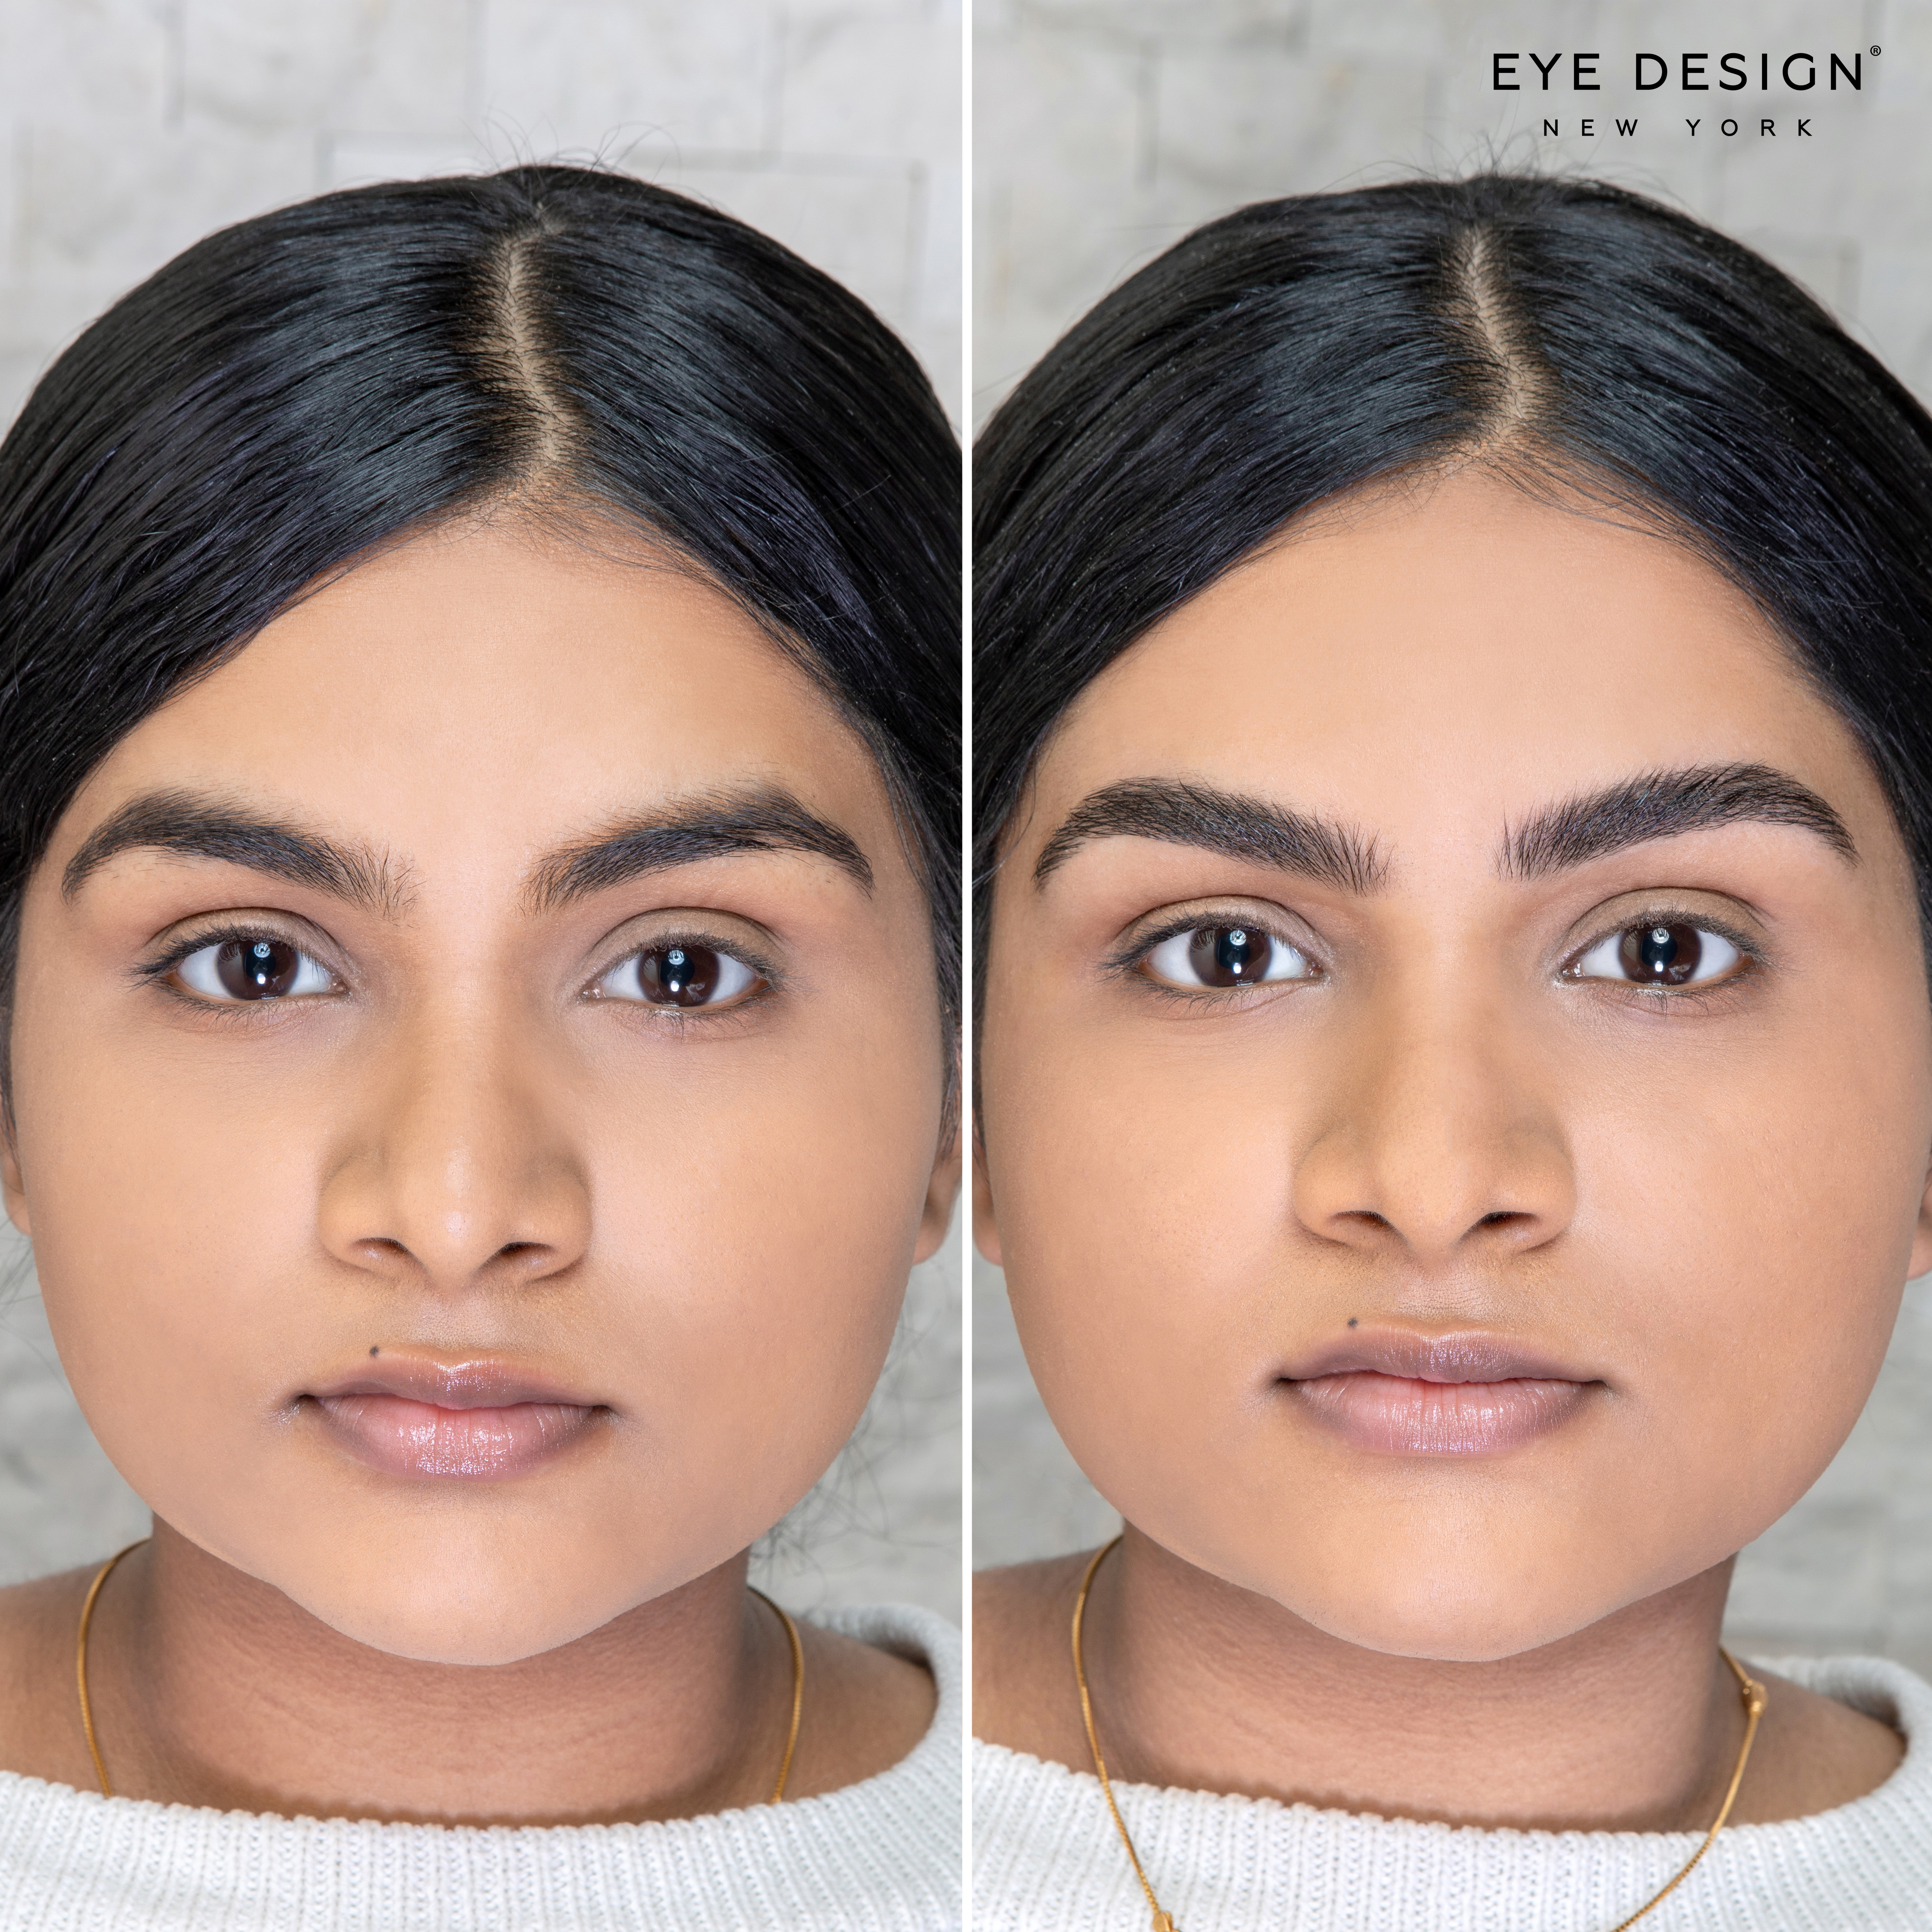 Introducing Brow Lift by Eye Design New York